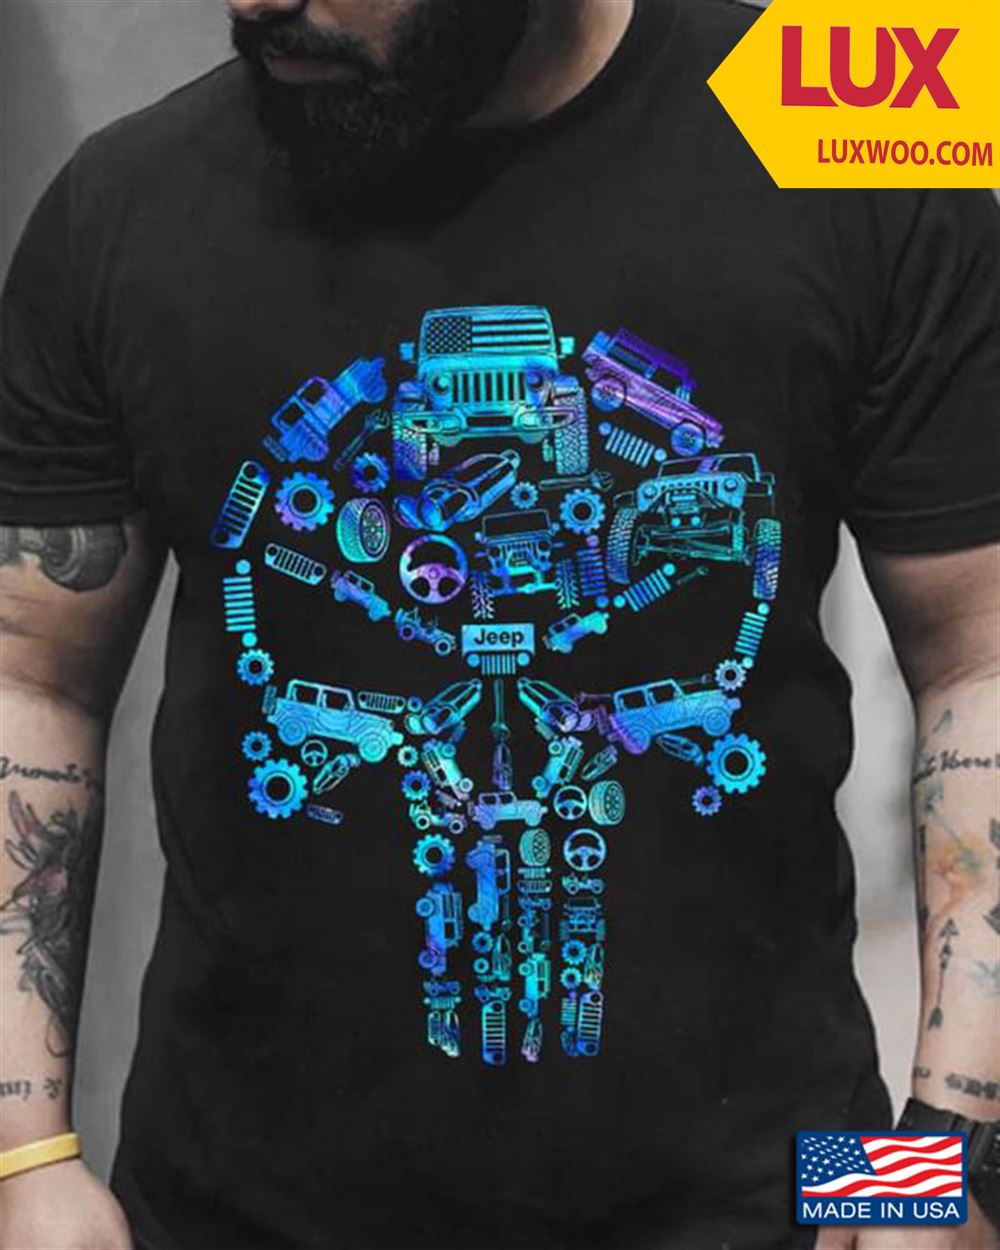 Jeep The Punisher Skull Tshirt Size Up To 5xl